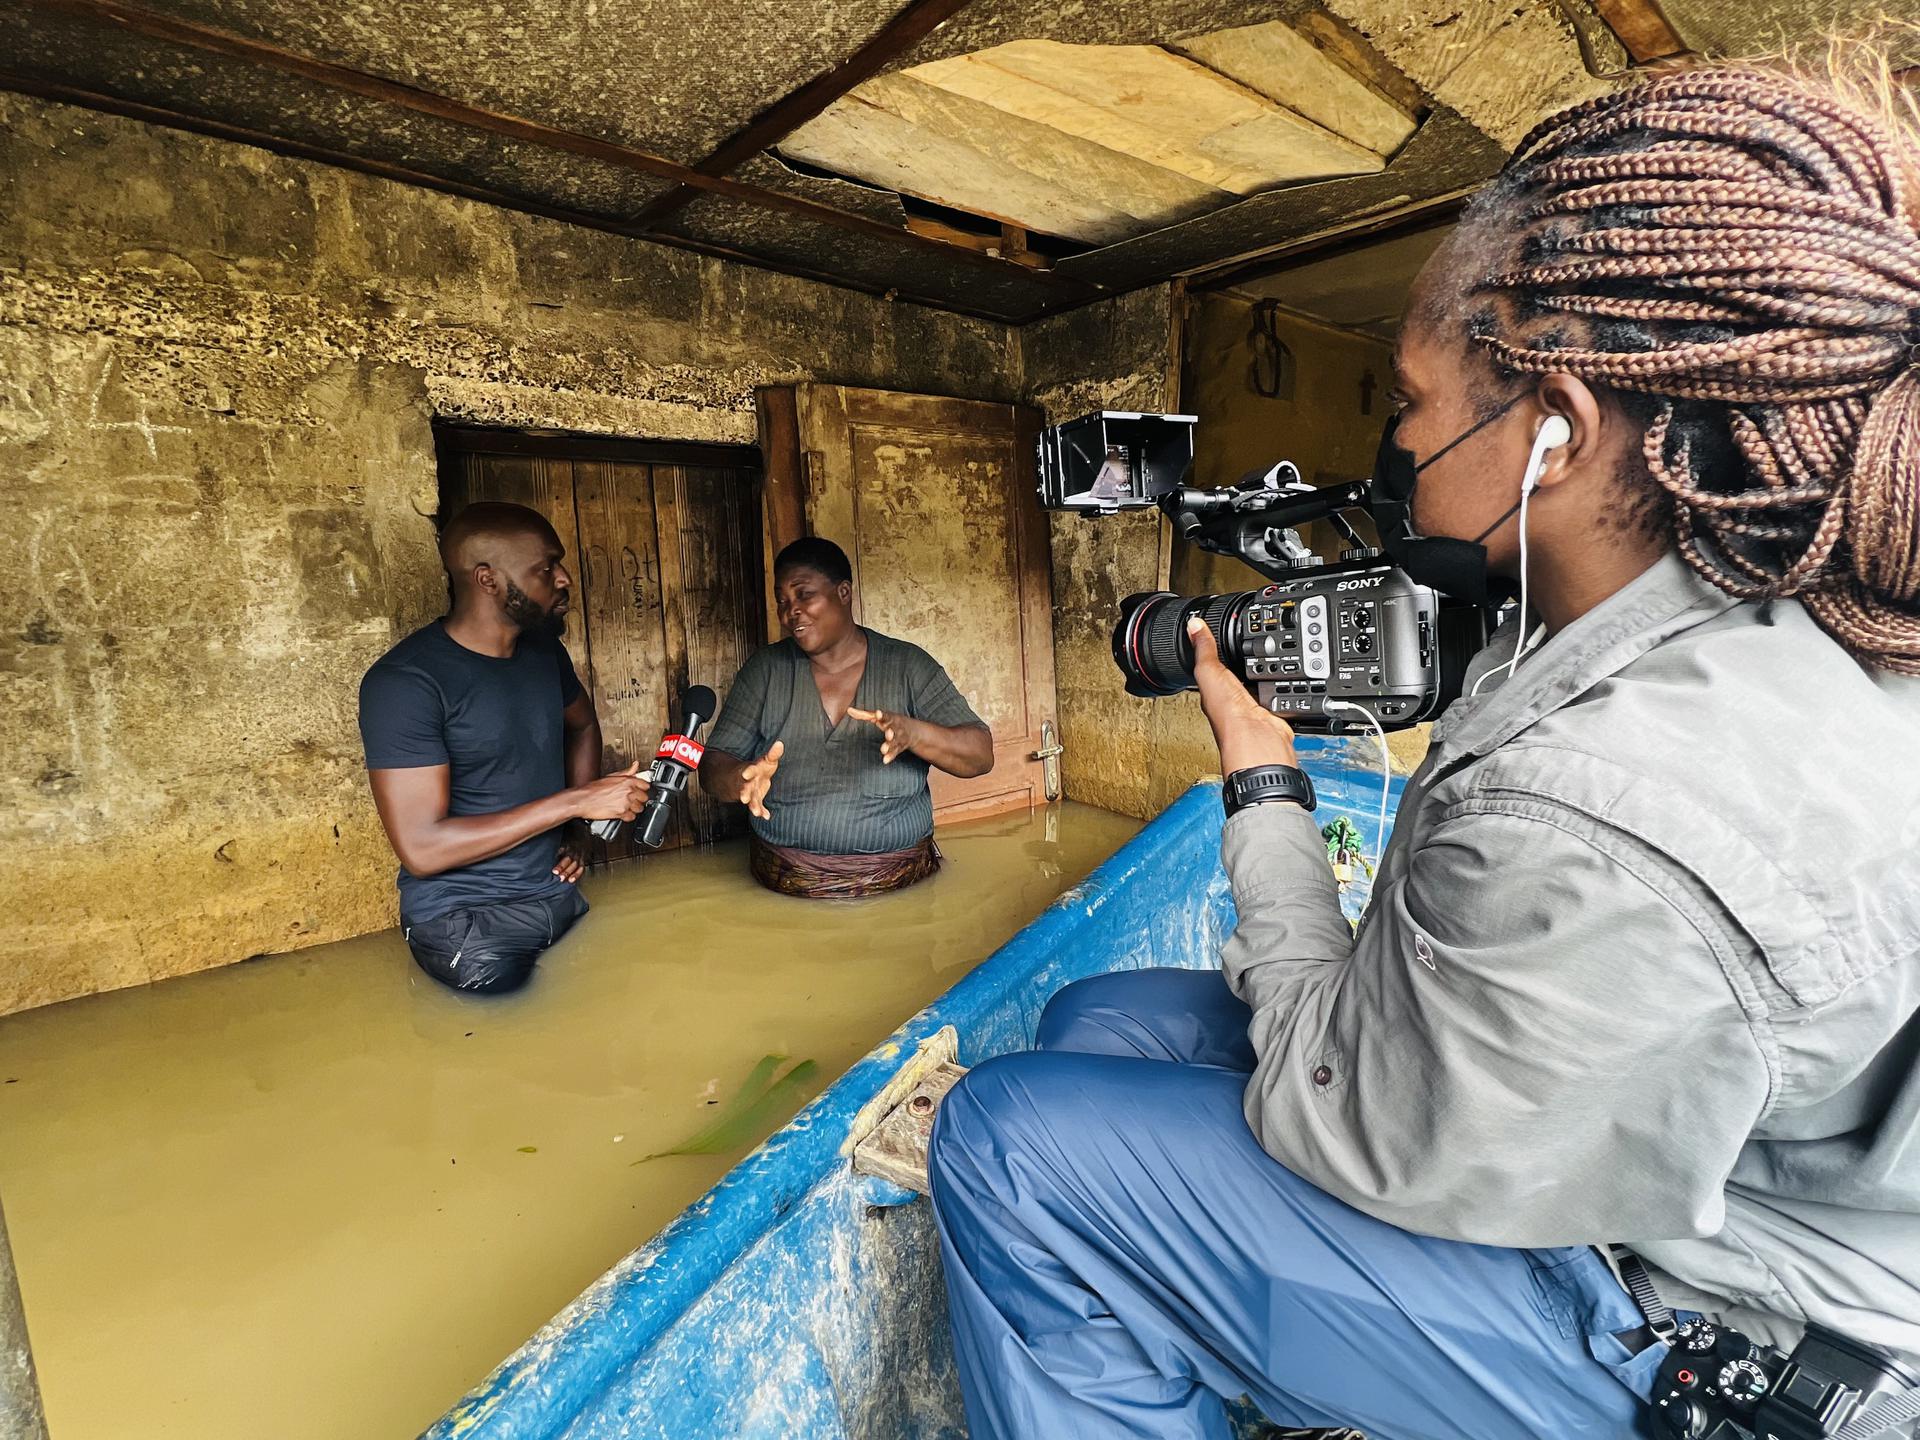 Madowo reporting in Nigeria on recent flooding